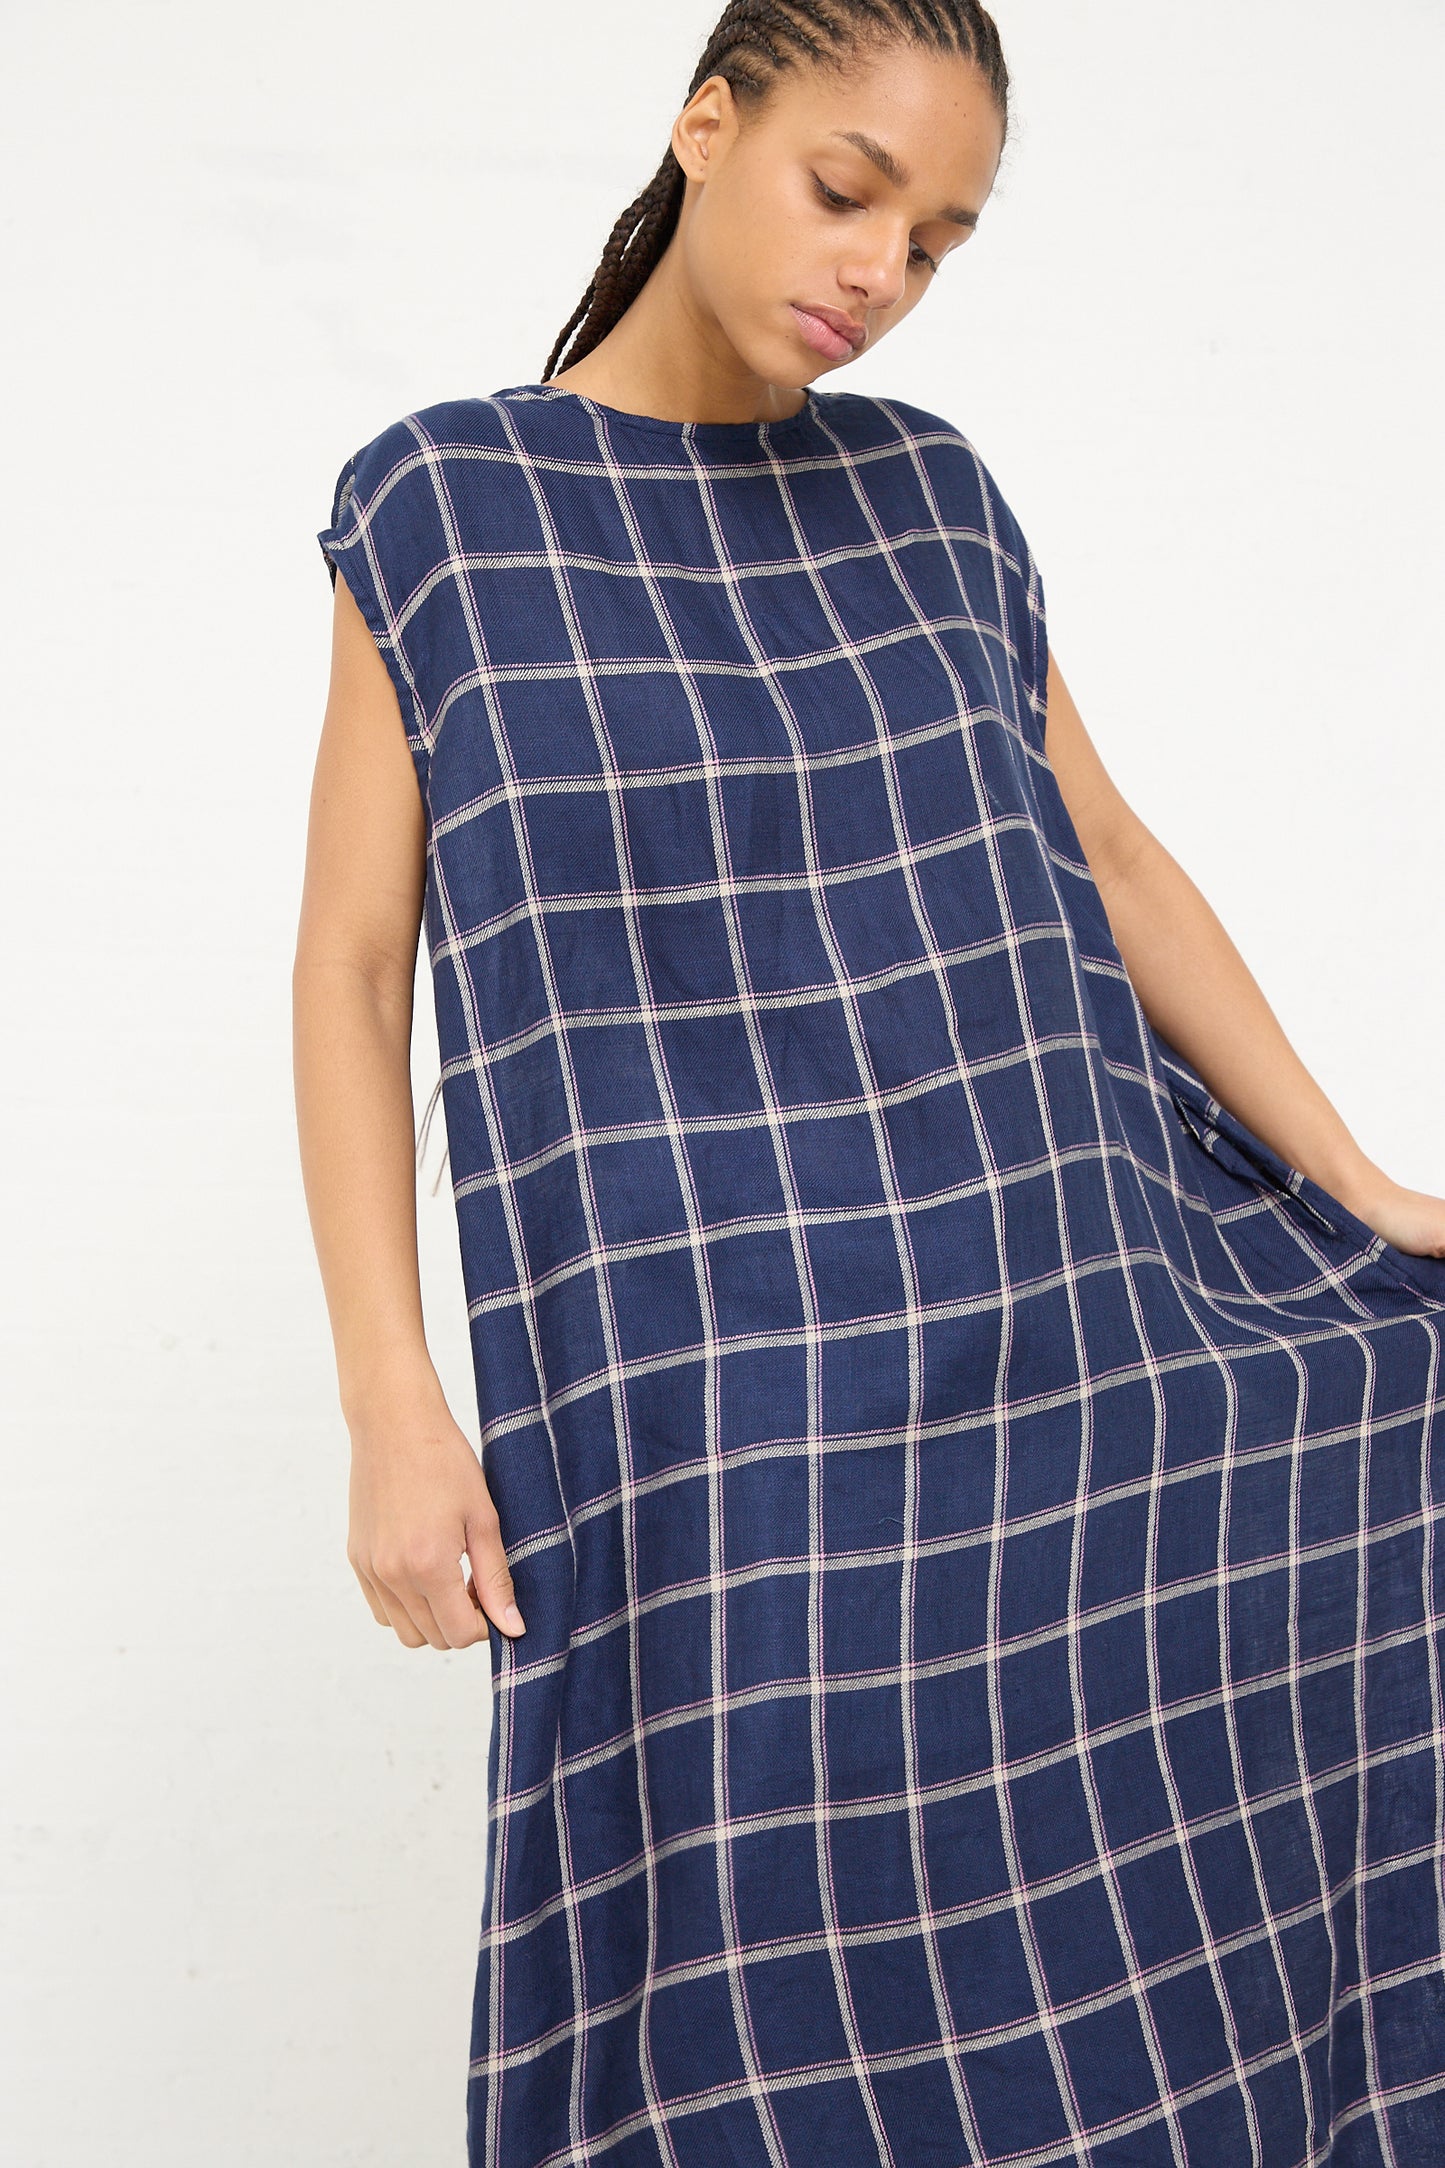 Woman posing in an Ichi Antiquités Linen Check Dress in Navy against a white background.